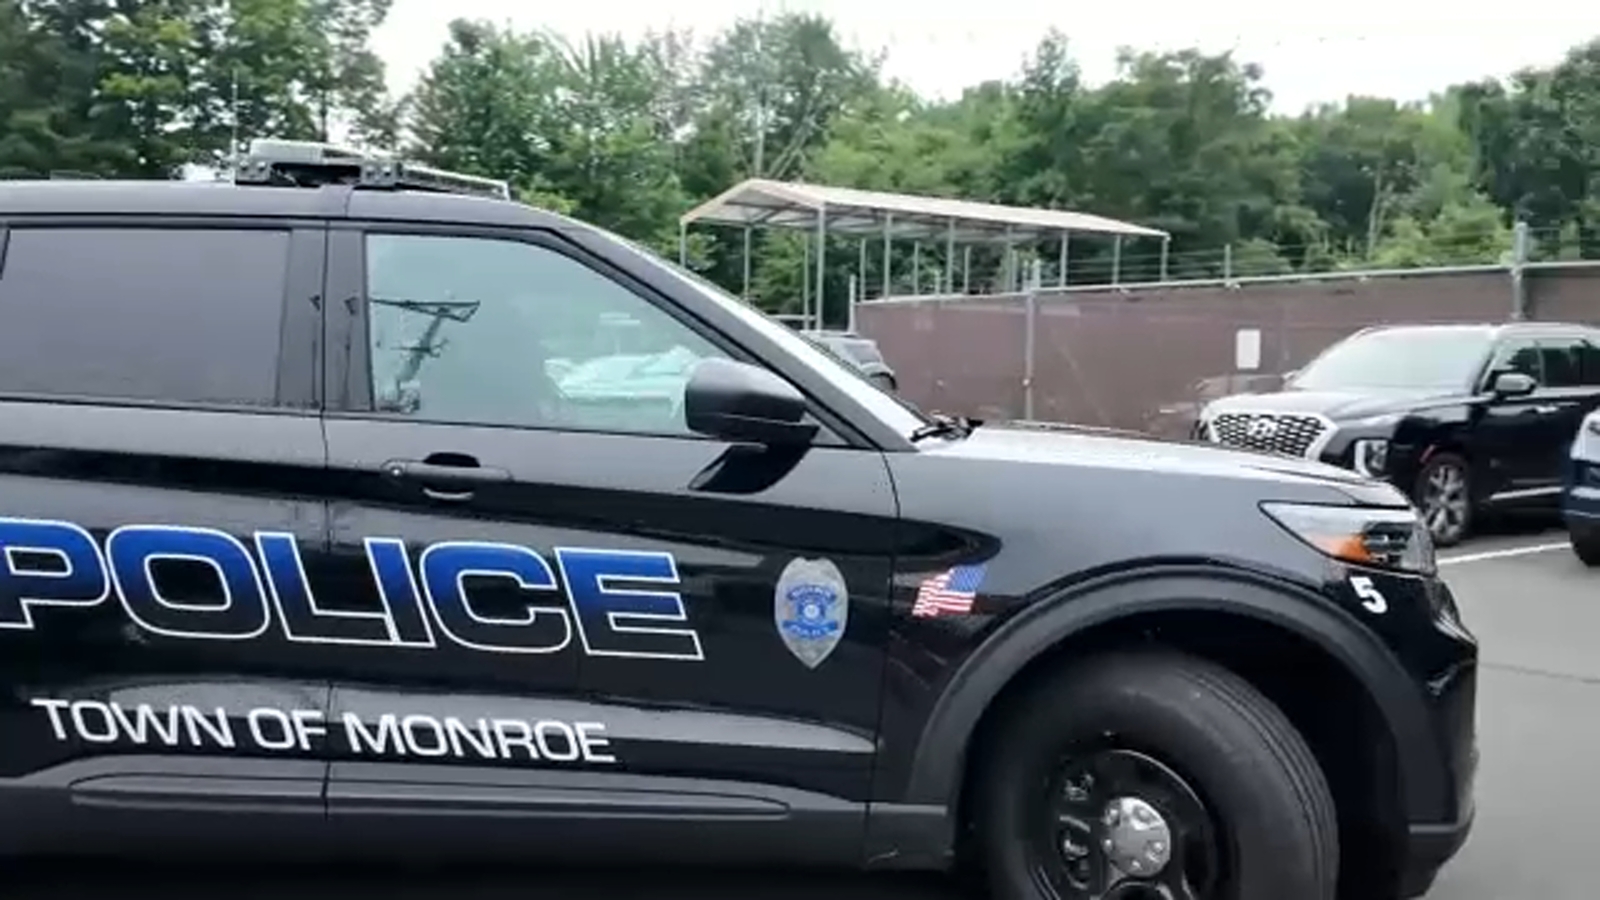 2-year-old boy shot inside Monroe, Connecticut home, mother attempts to rush toddler to hospital [Video]